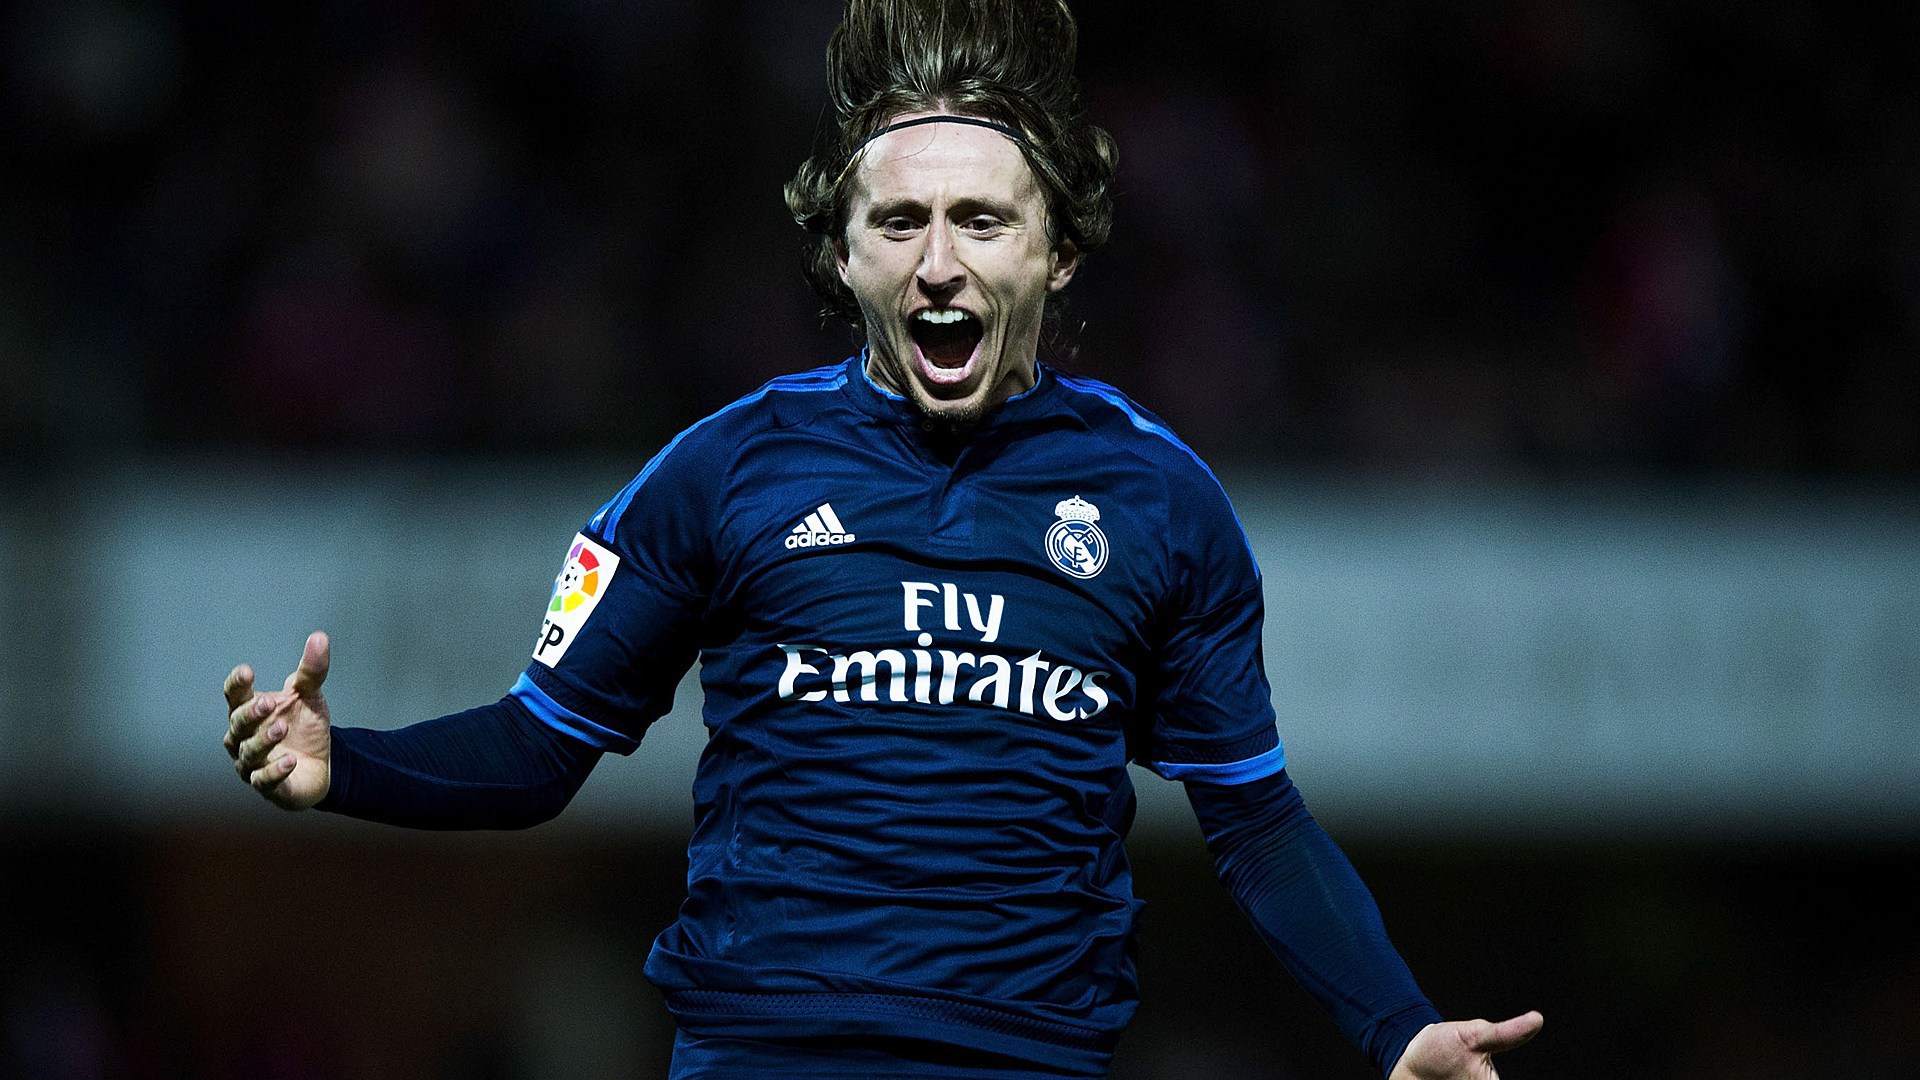 Luka Modric Wallpaper Image Photos Pictures Background